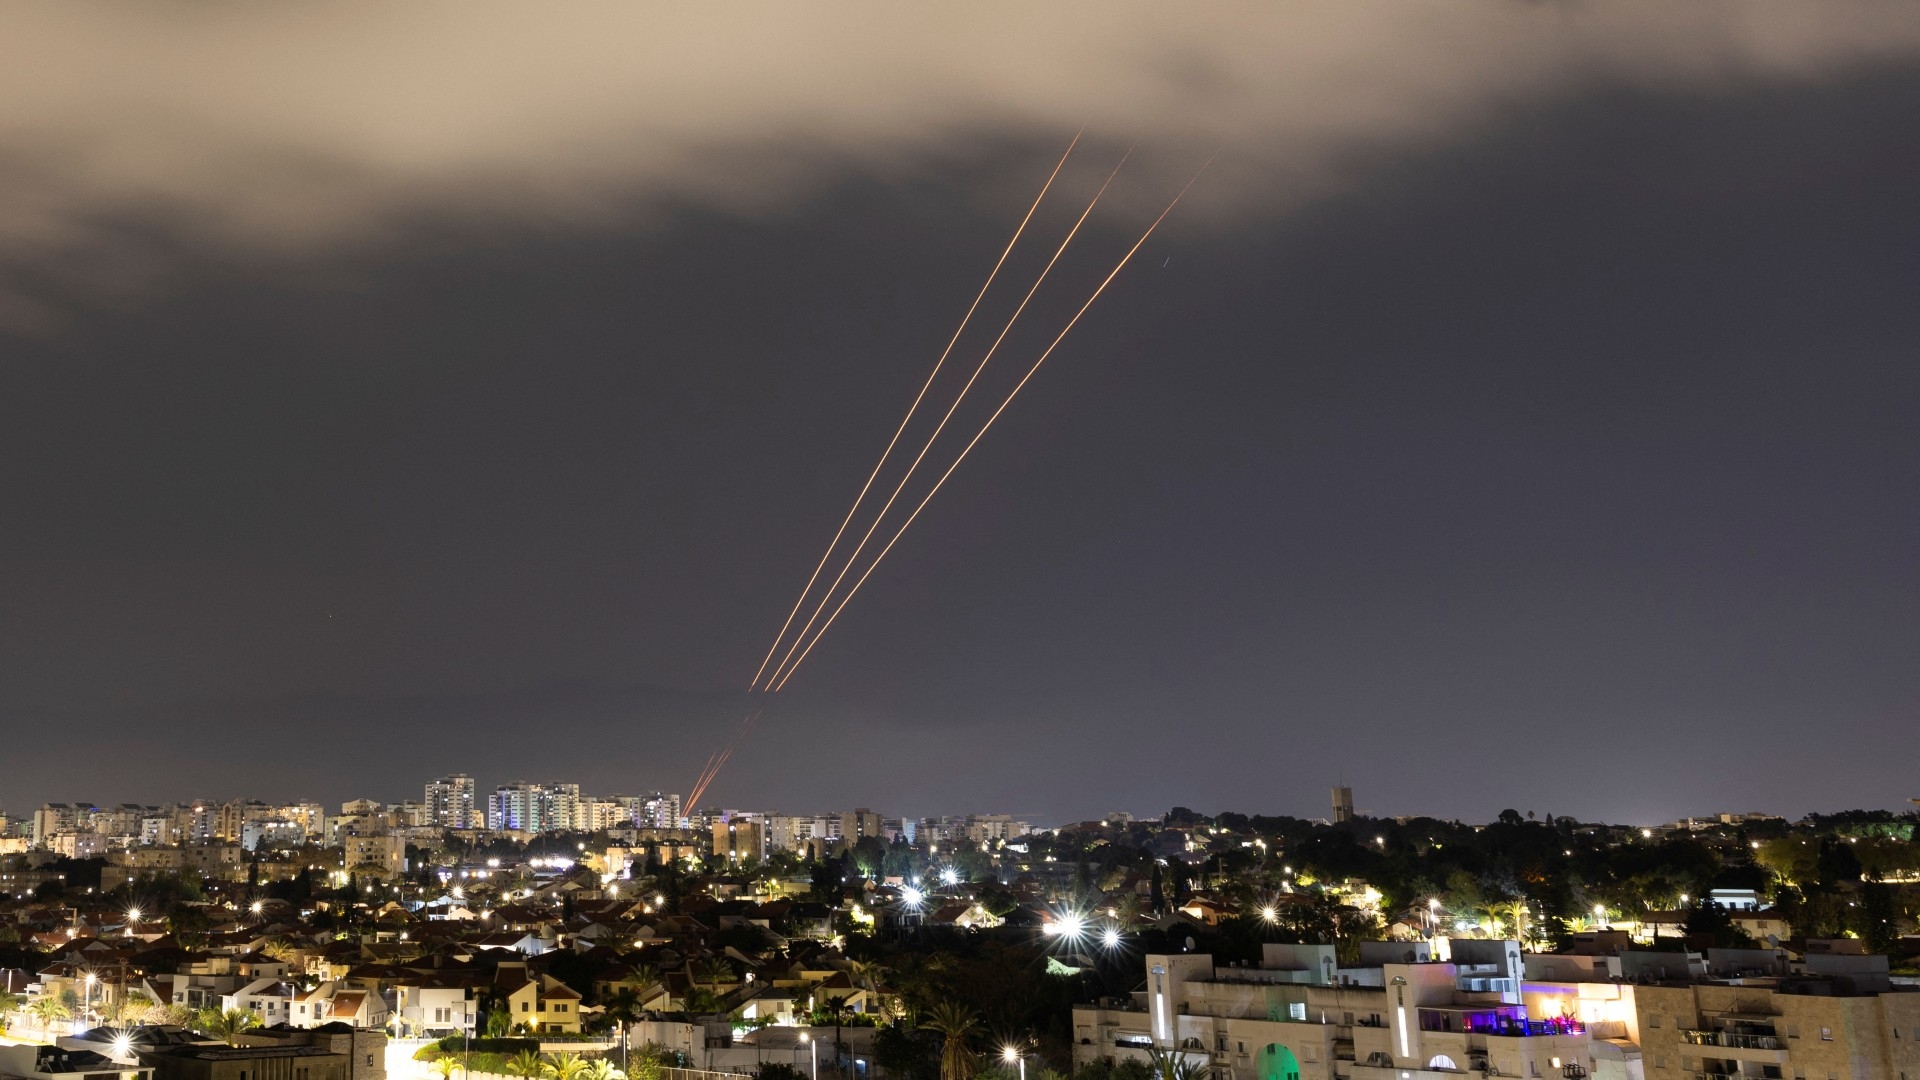 An anti-missile system operates after Iran launched drones and missiles towards Israel, as seen from Ashkelon, 14 April (Reuters/Amir Cohen)